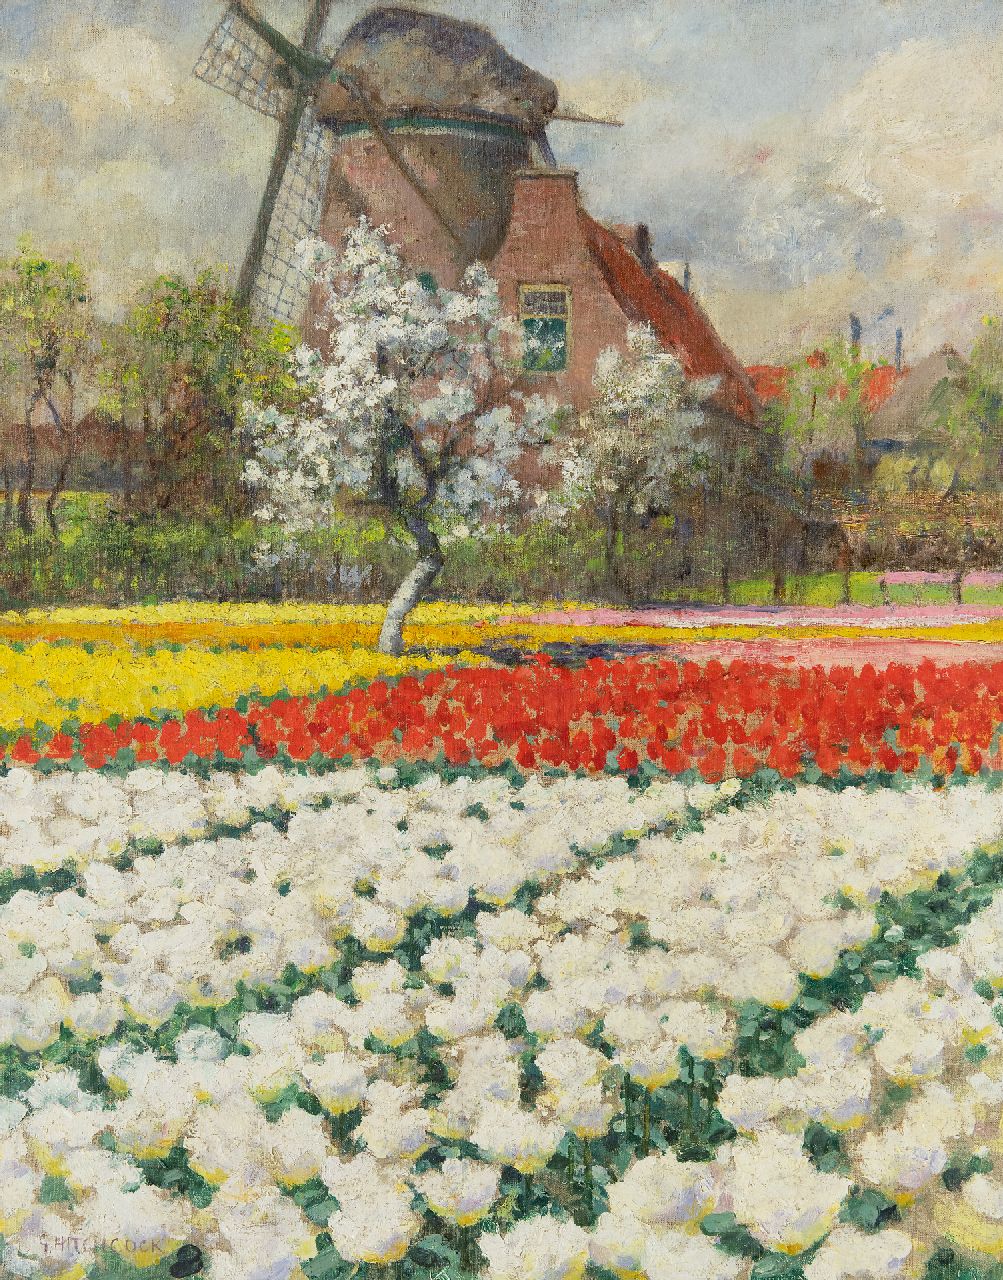 George Hitchcock | Double White Tulips, Egmond aan den Hoef, oil on canvas, 55.7 x 43.8 cm, signed l.l.